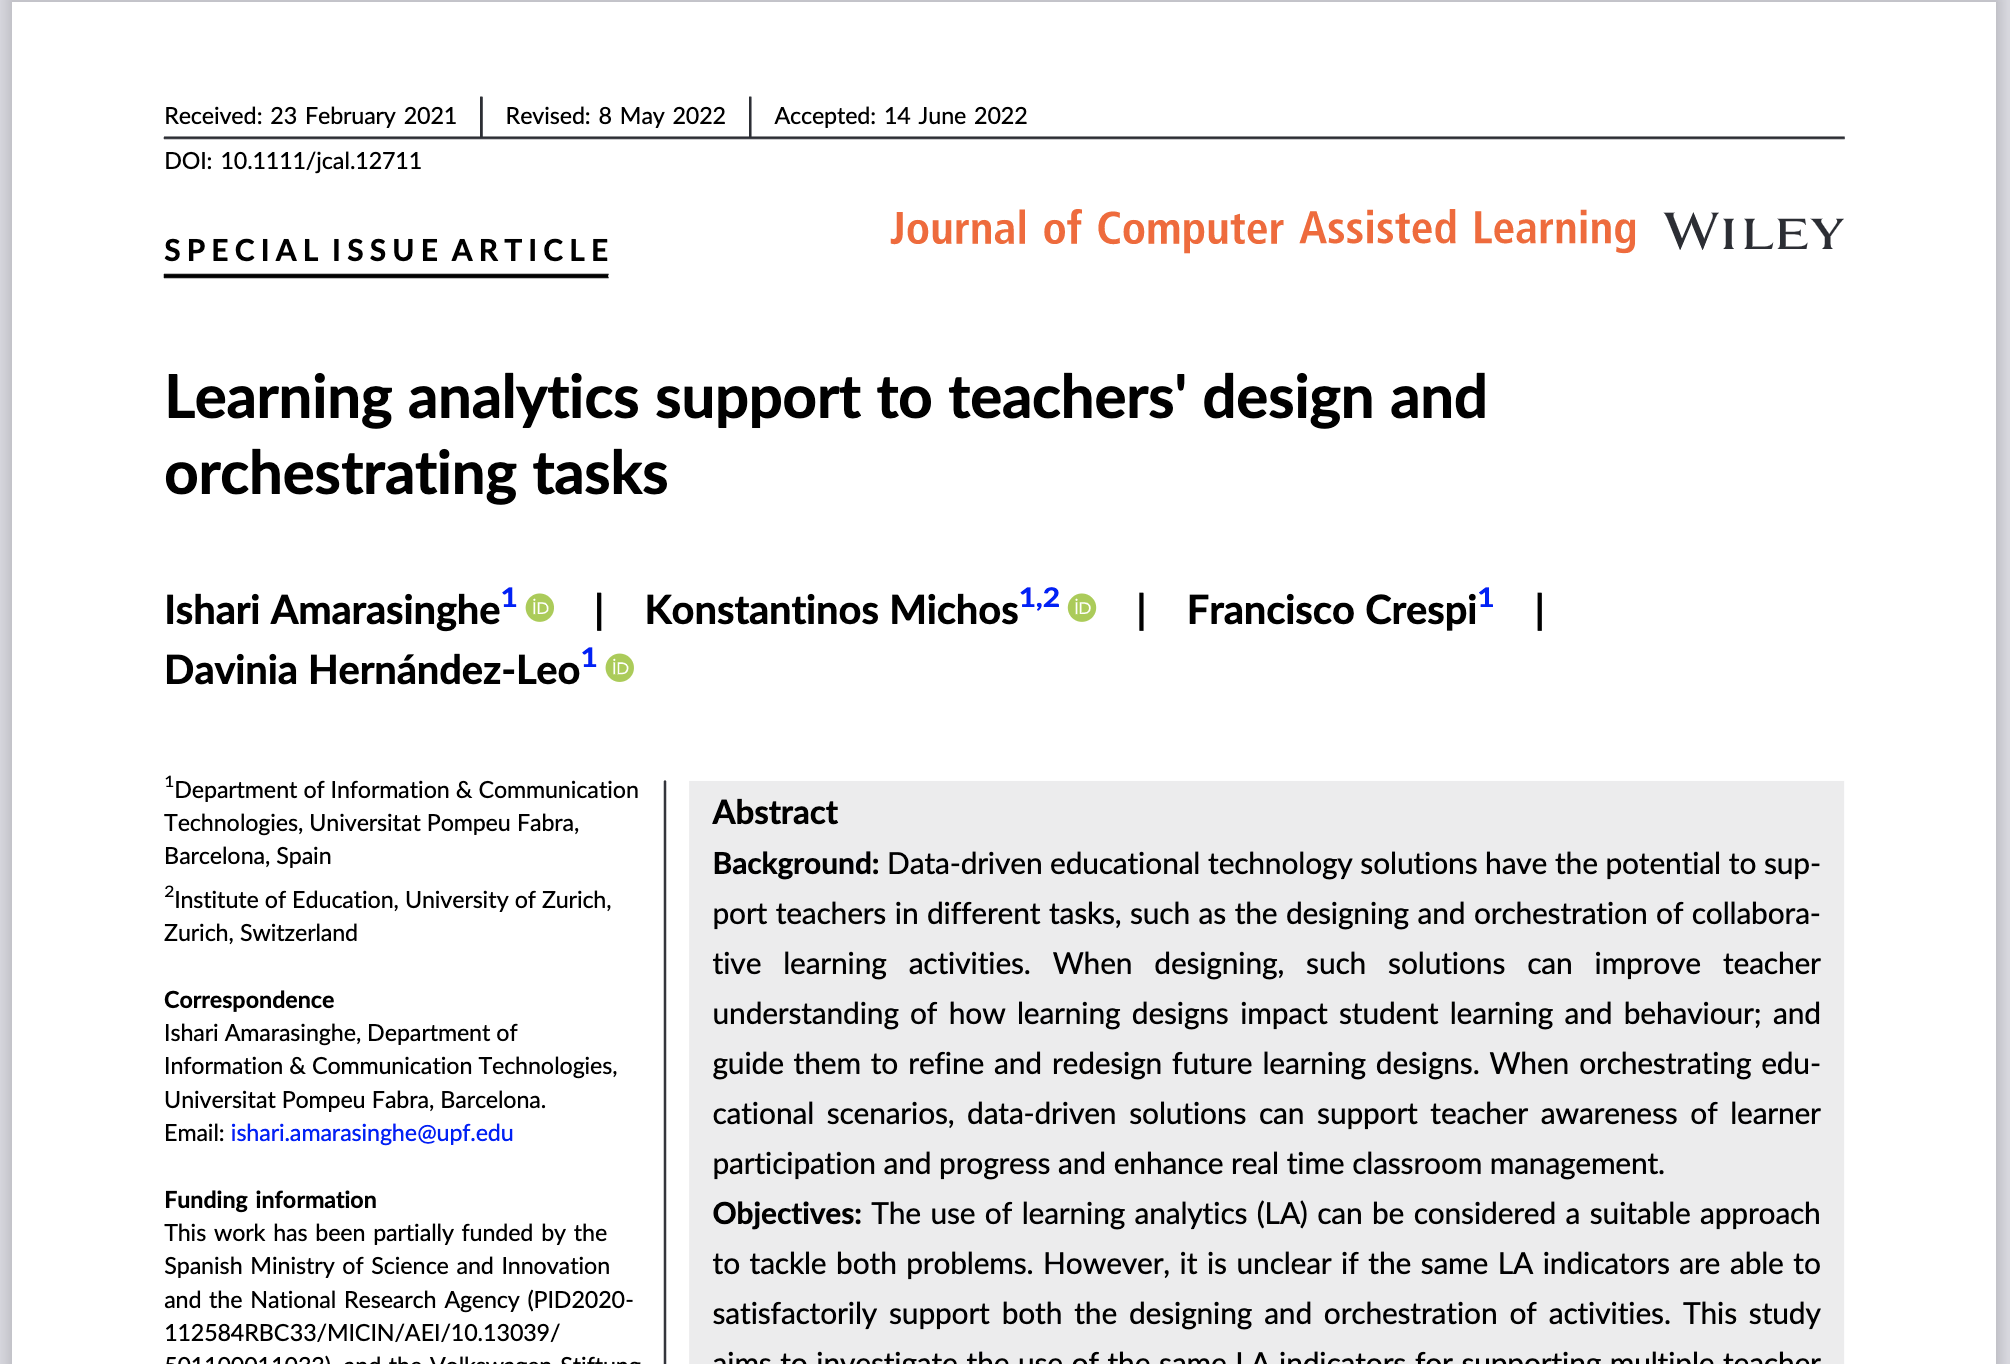 New JCAL paper: Learning Analytics Support to Teachers’ Design and Orchestrating Tasks,